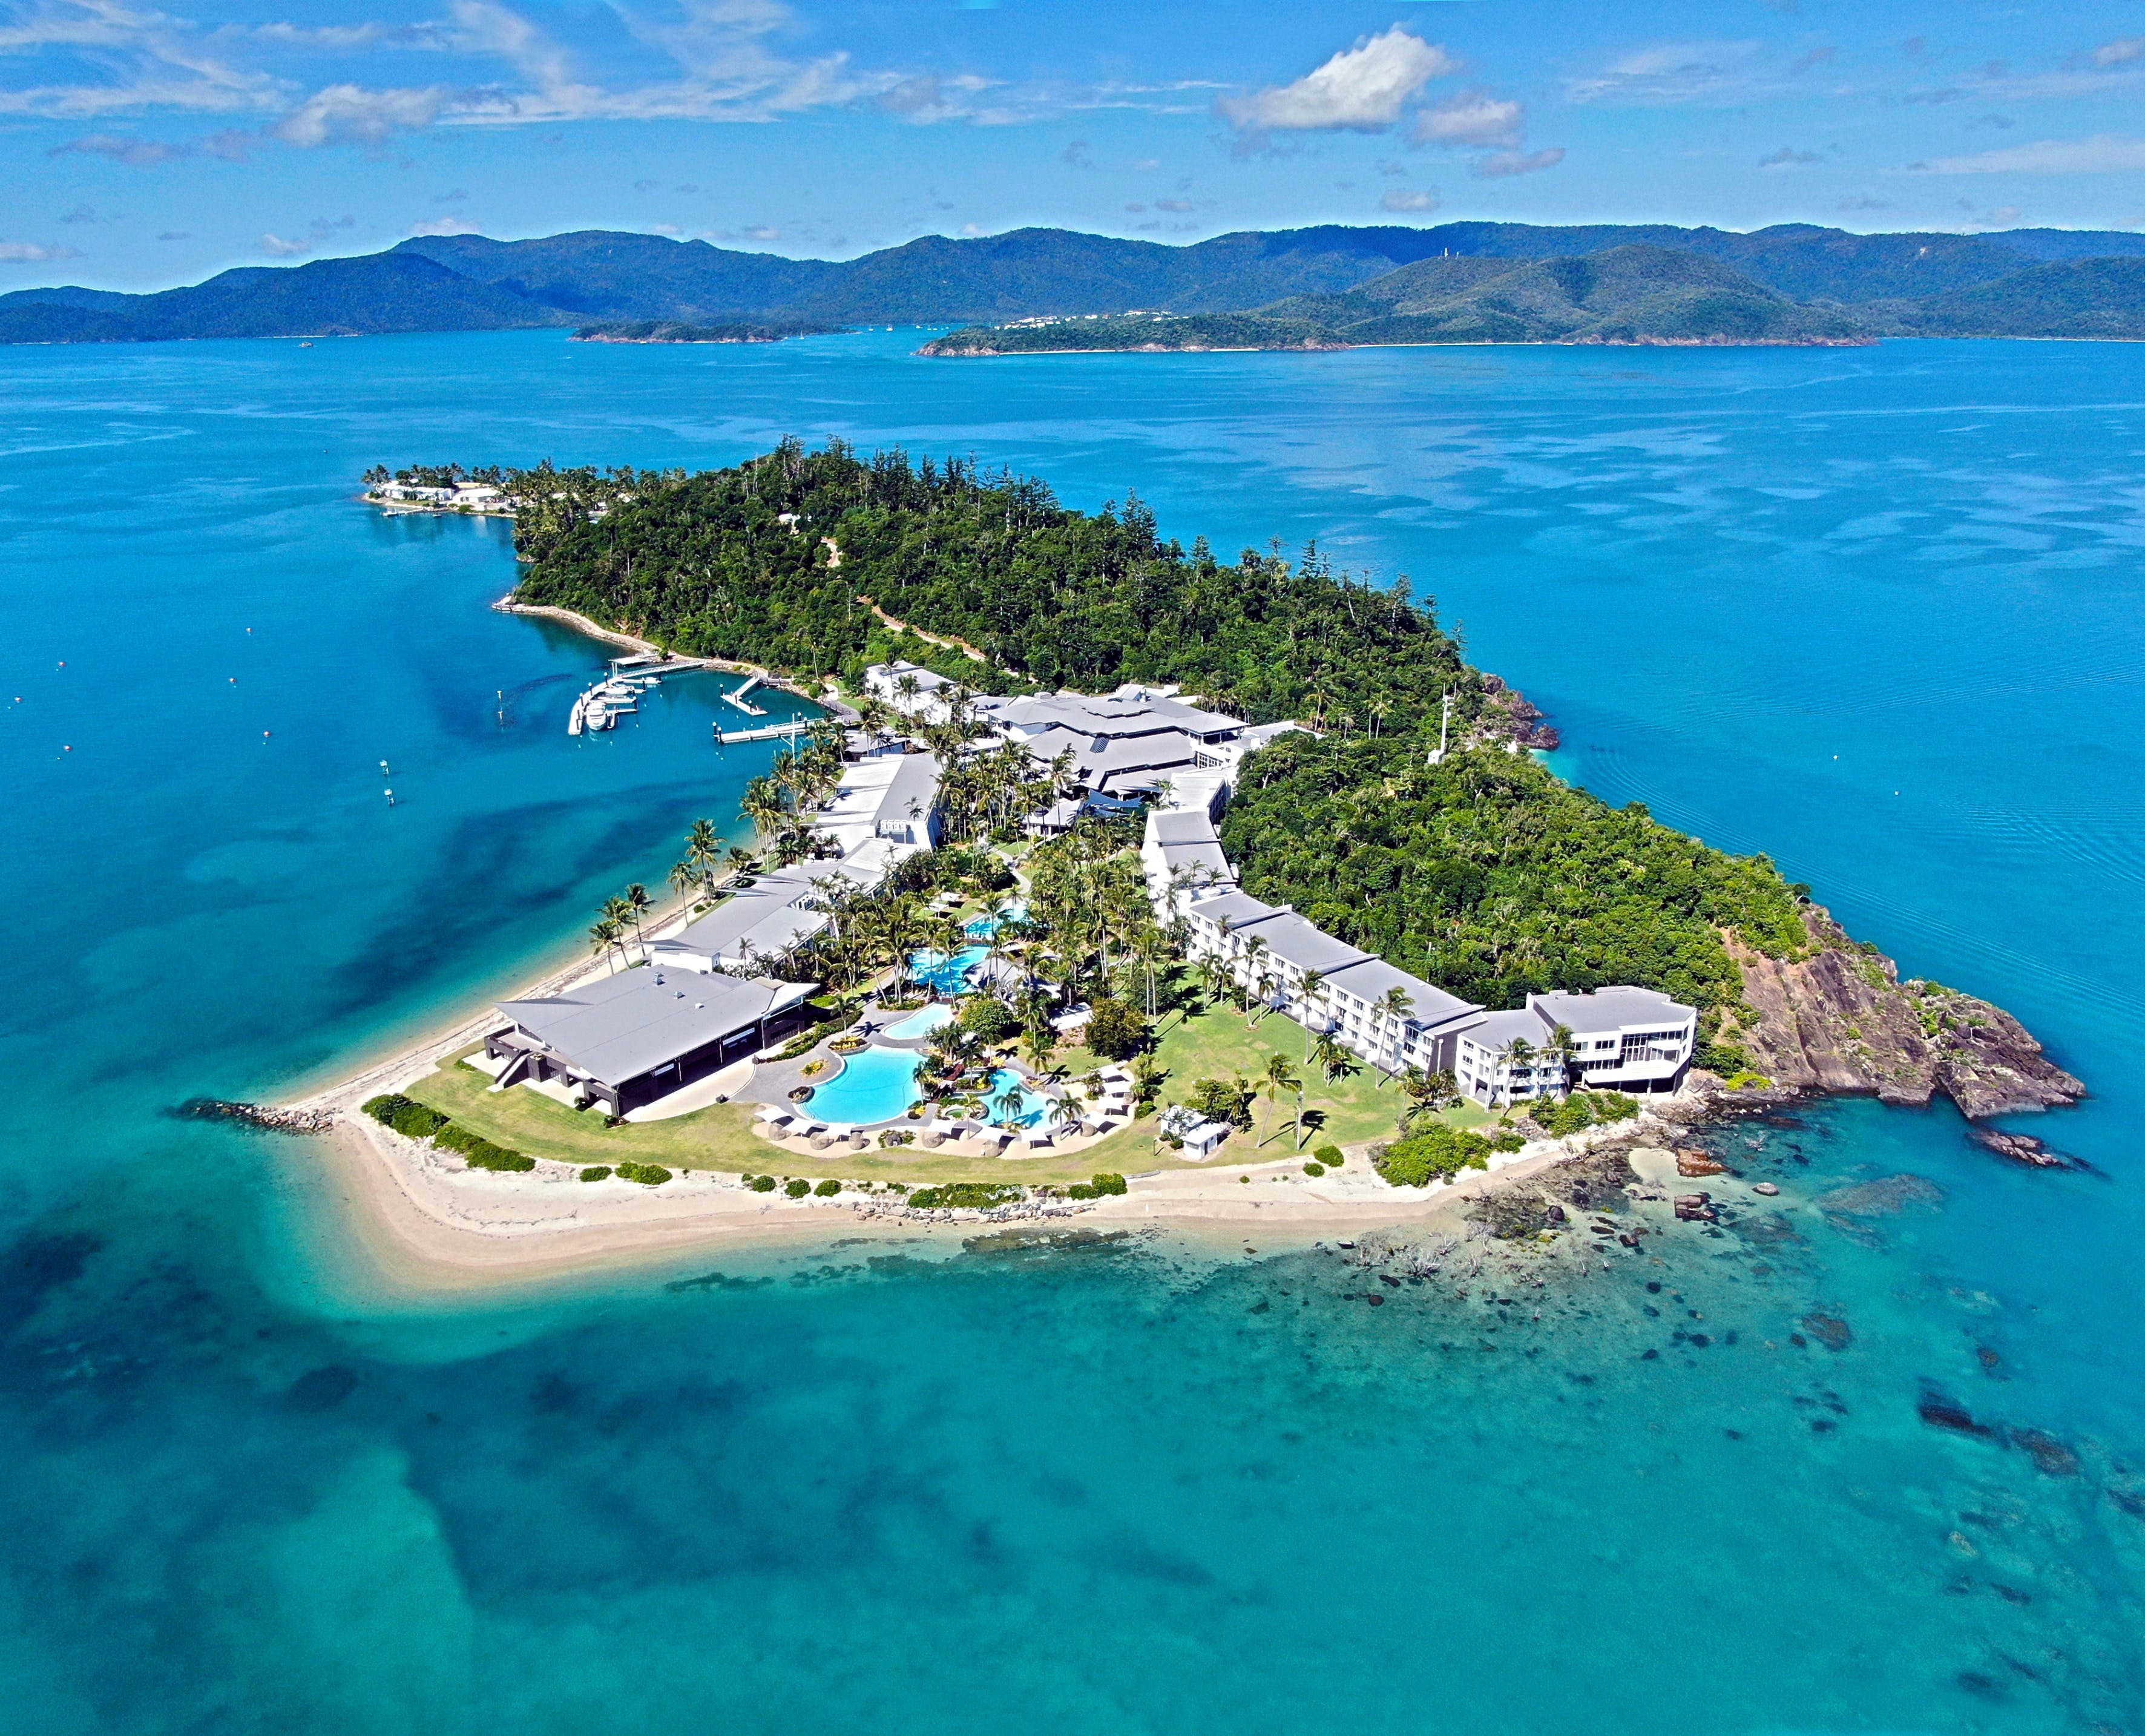 Daydream Island Resort and Living Reef - Coogee Beach Accommodation